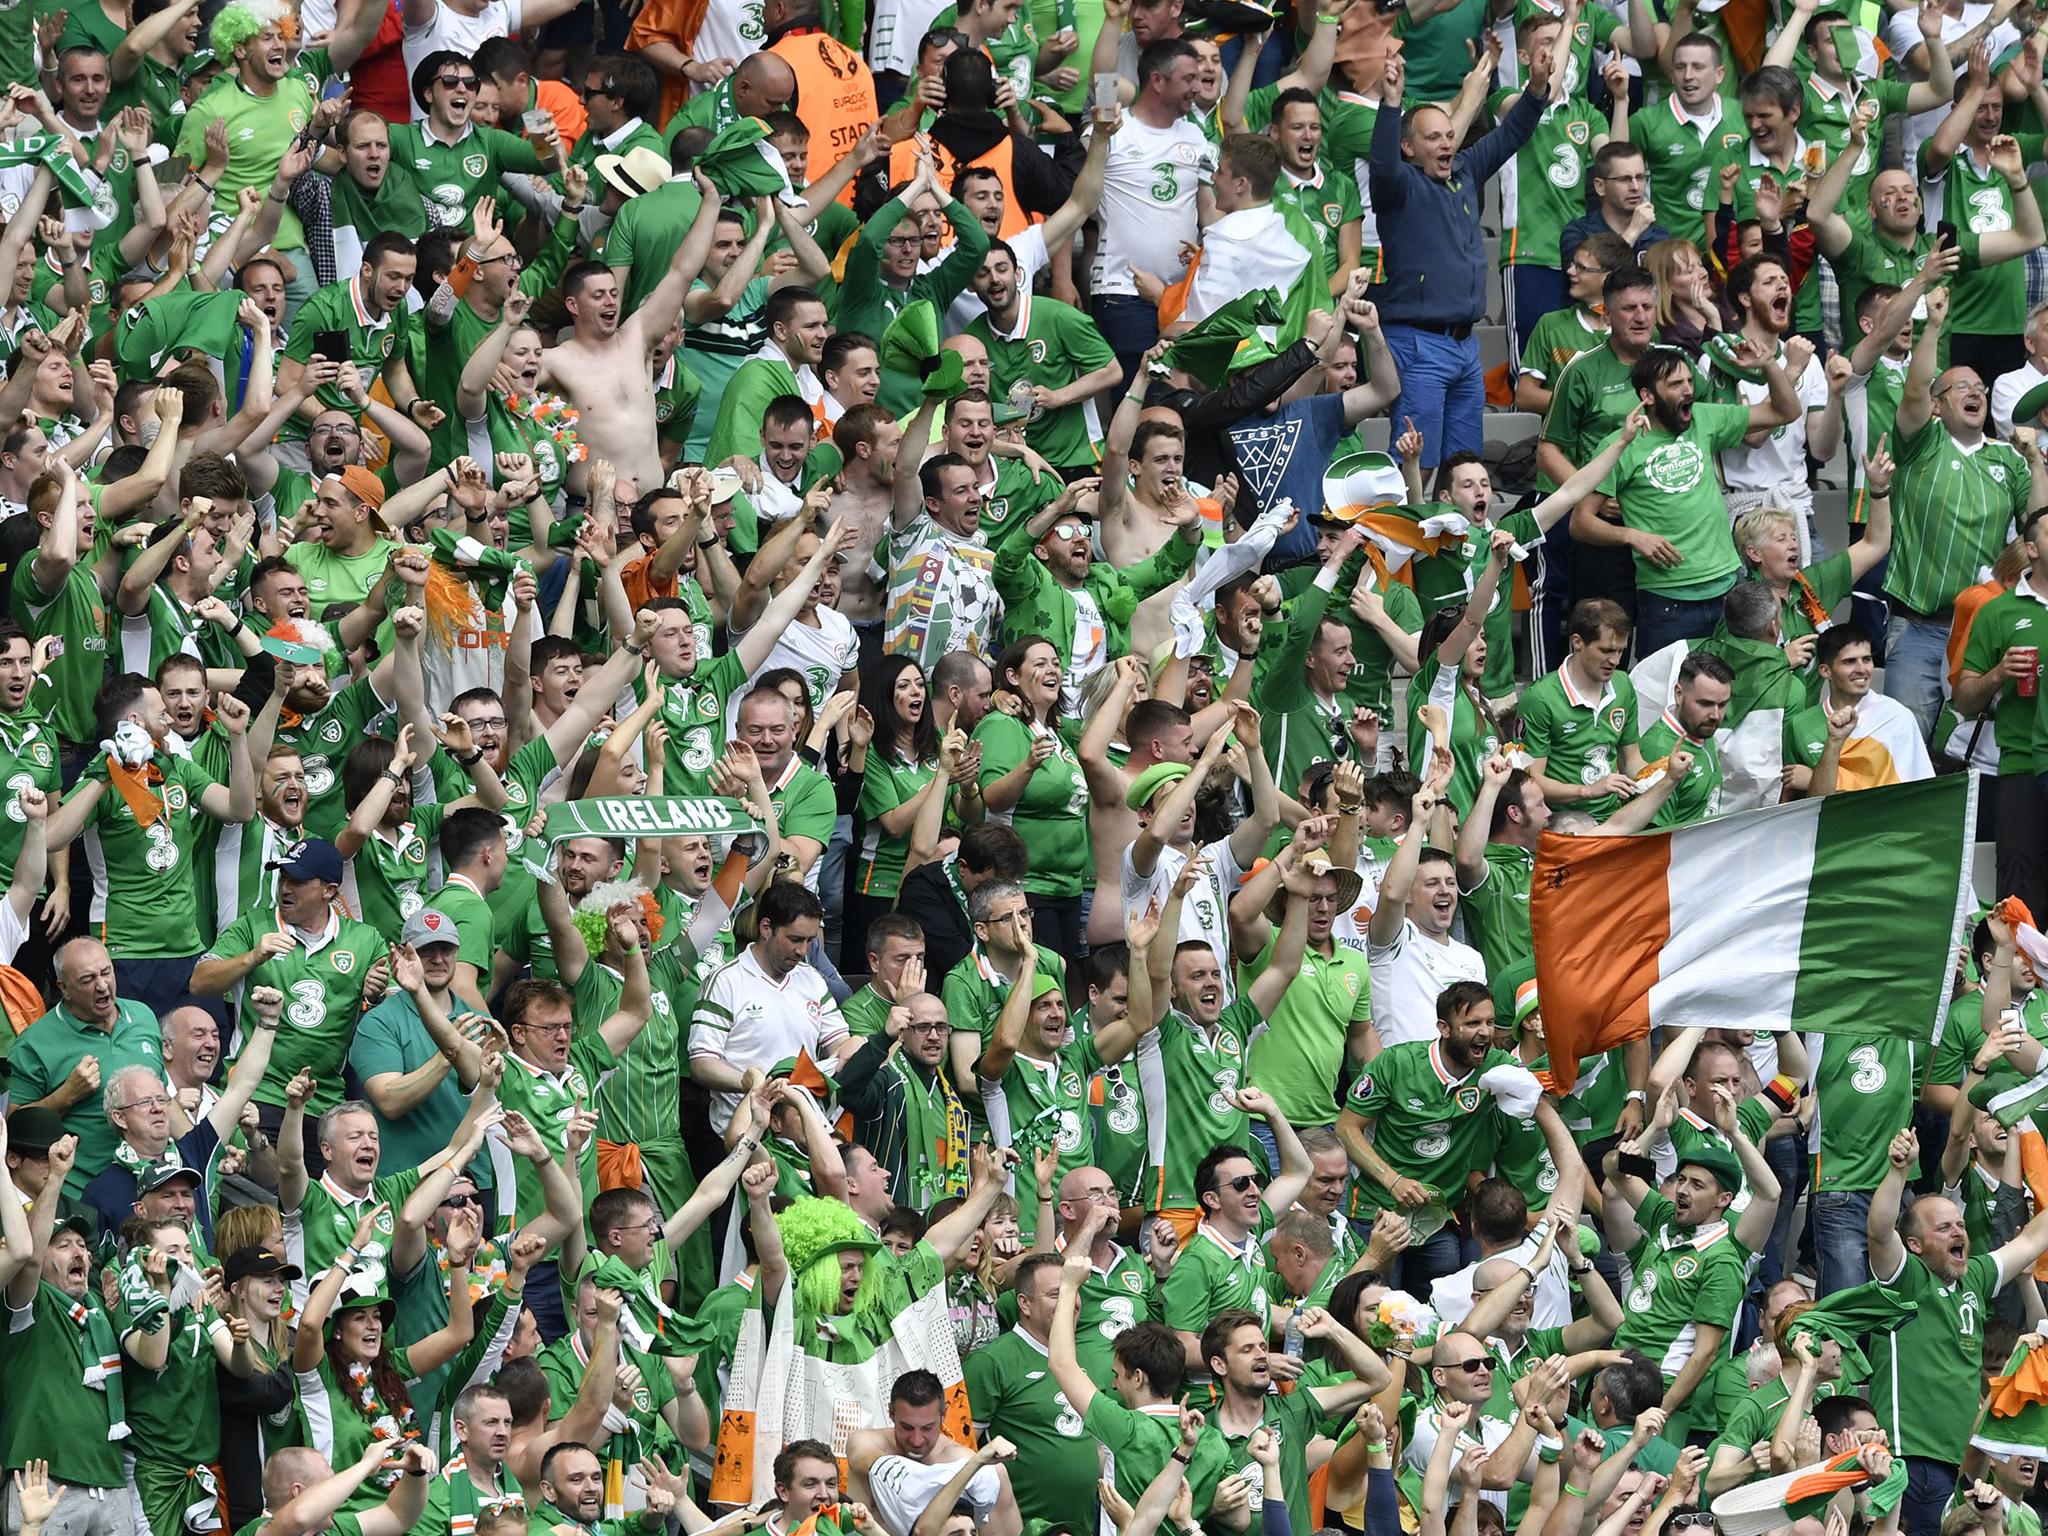 Ireland's colourful support at the Stade de France